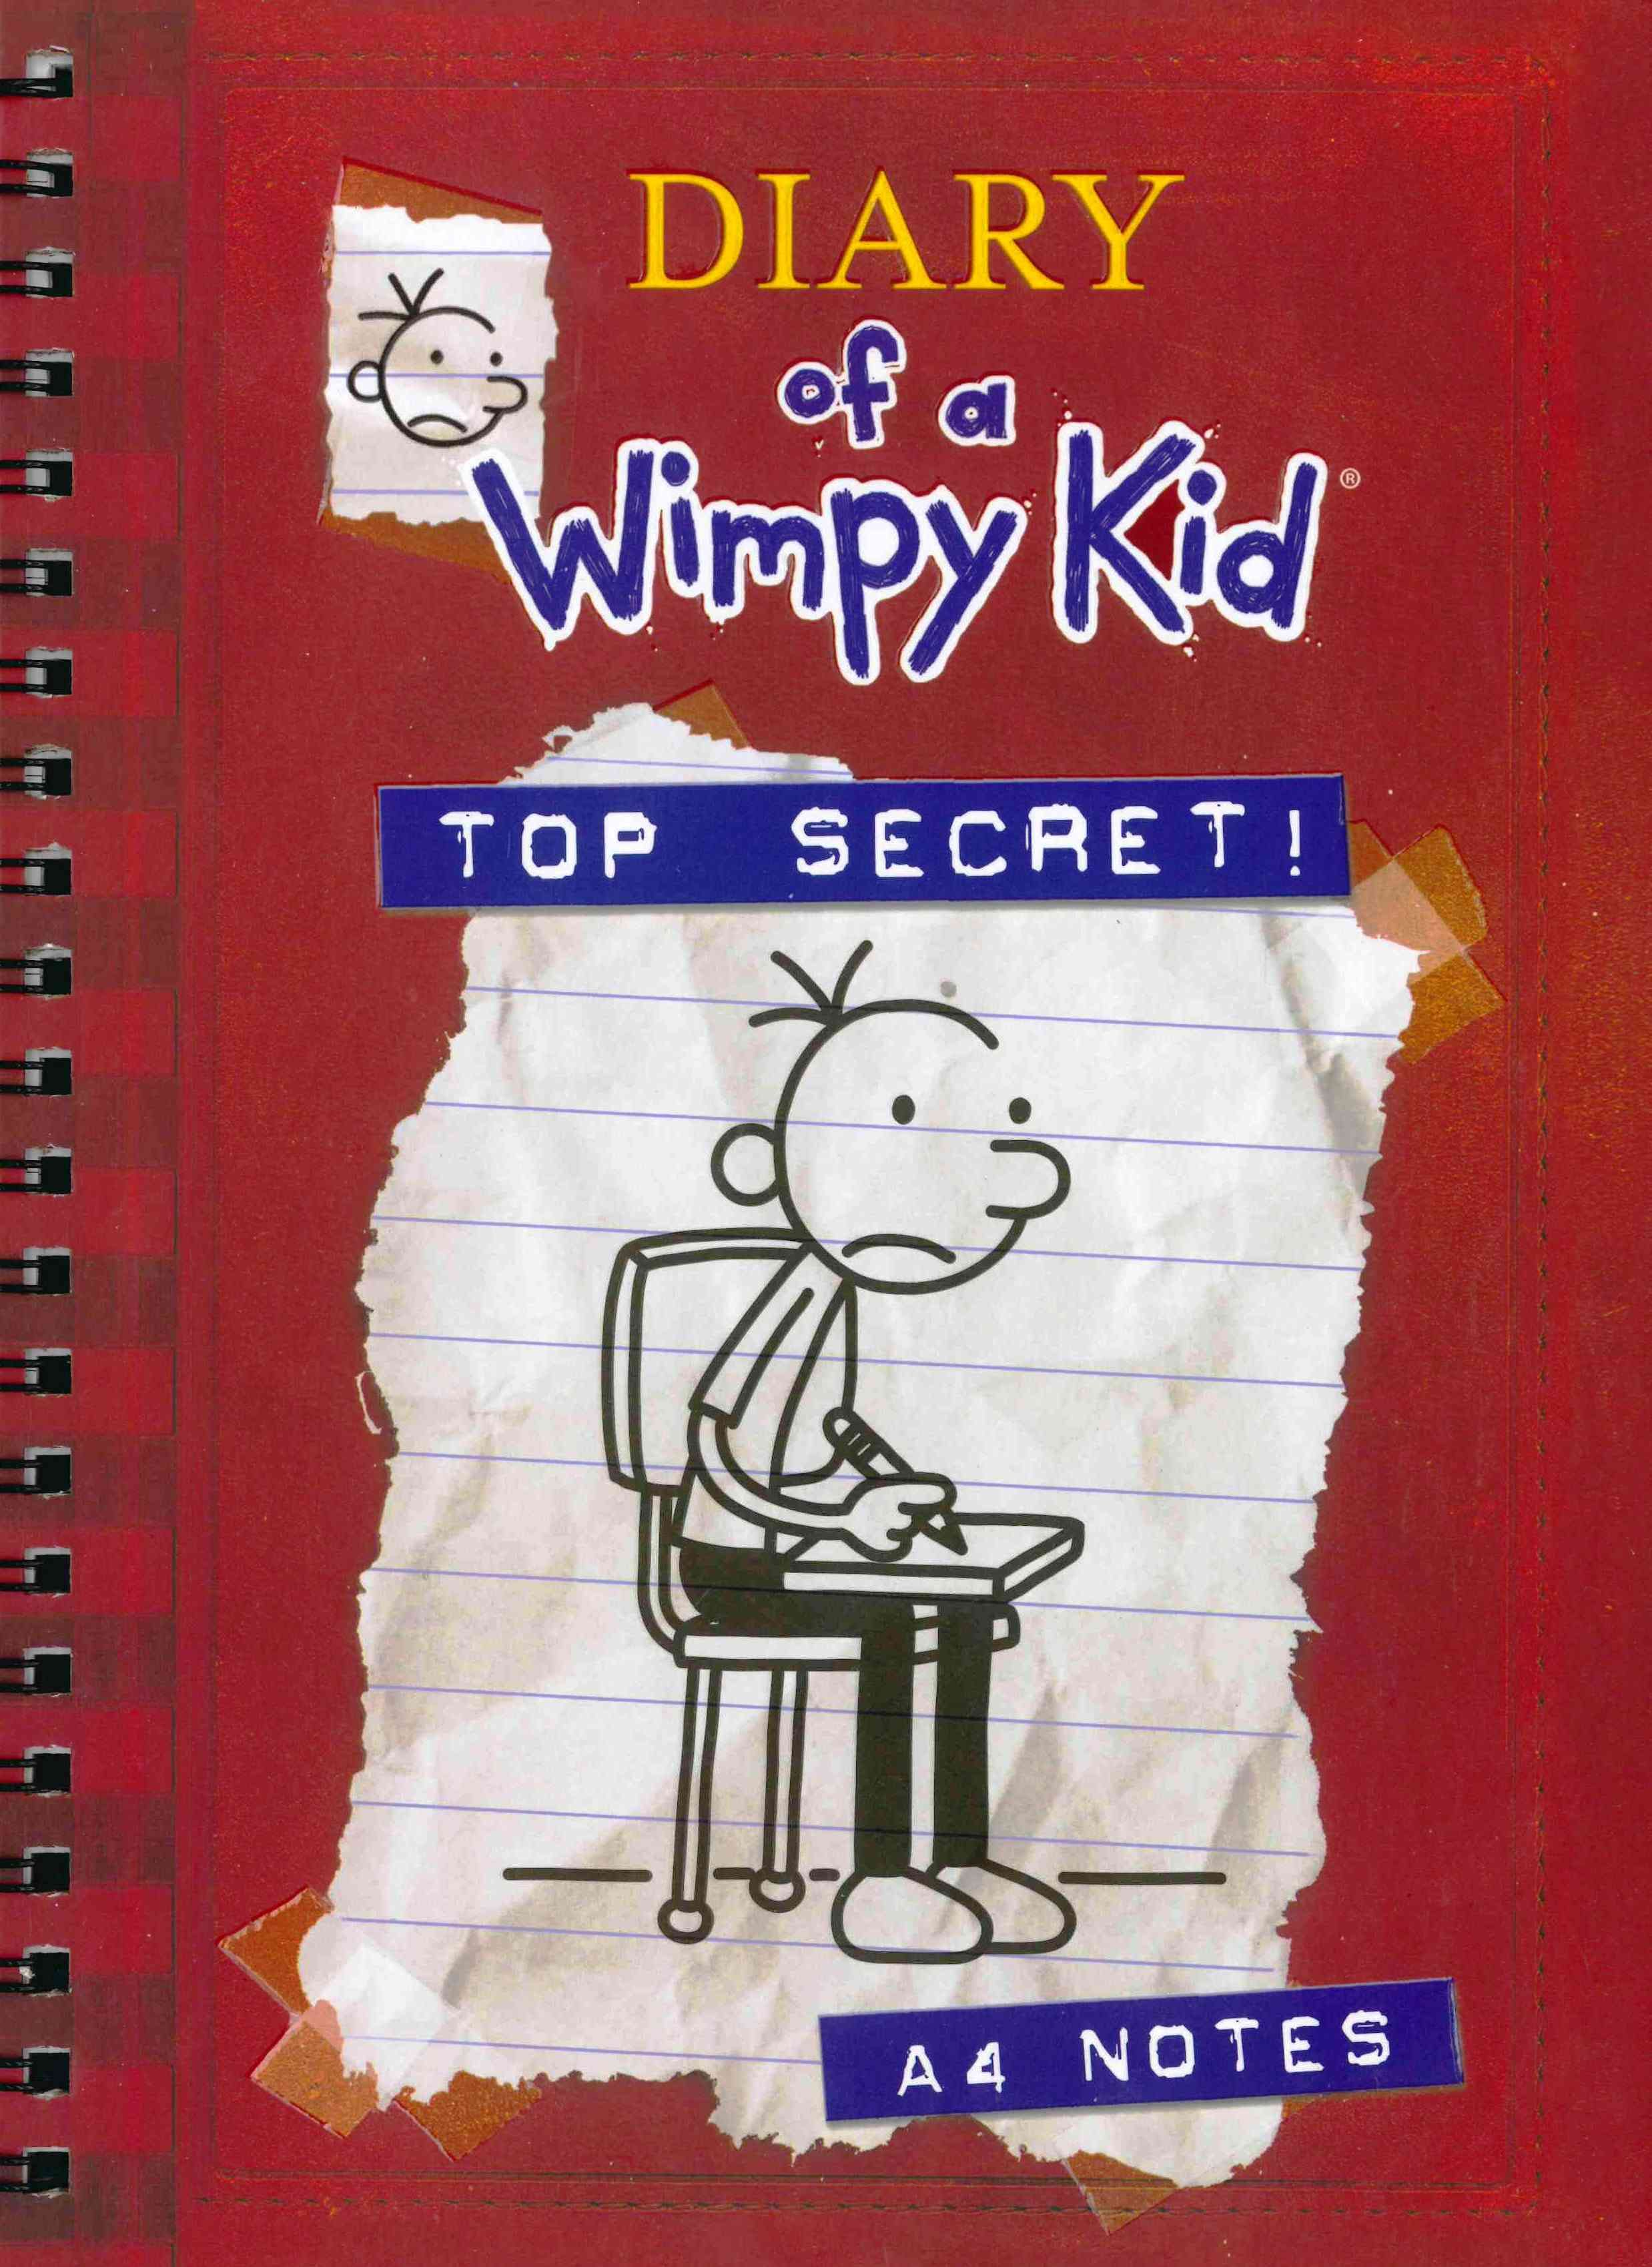 Free Diary Of A Wimpy Kid Books